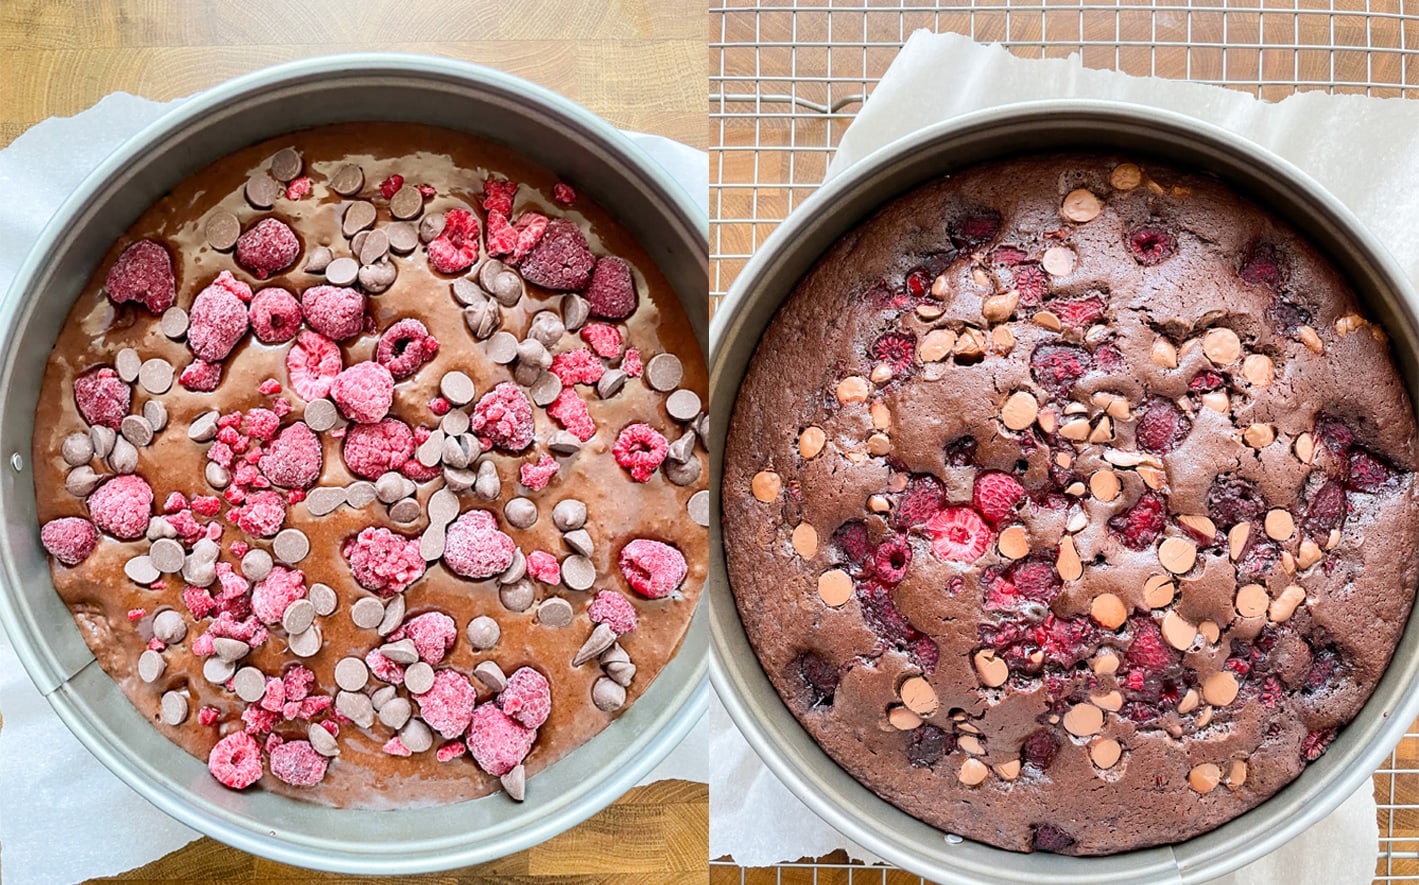 Process of adding raspberries and chocolate chips and baking the chocolate raspberry cake.